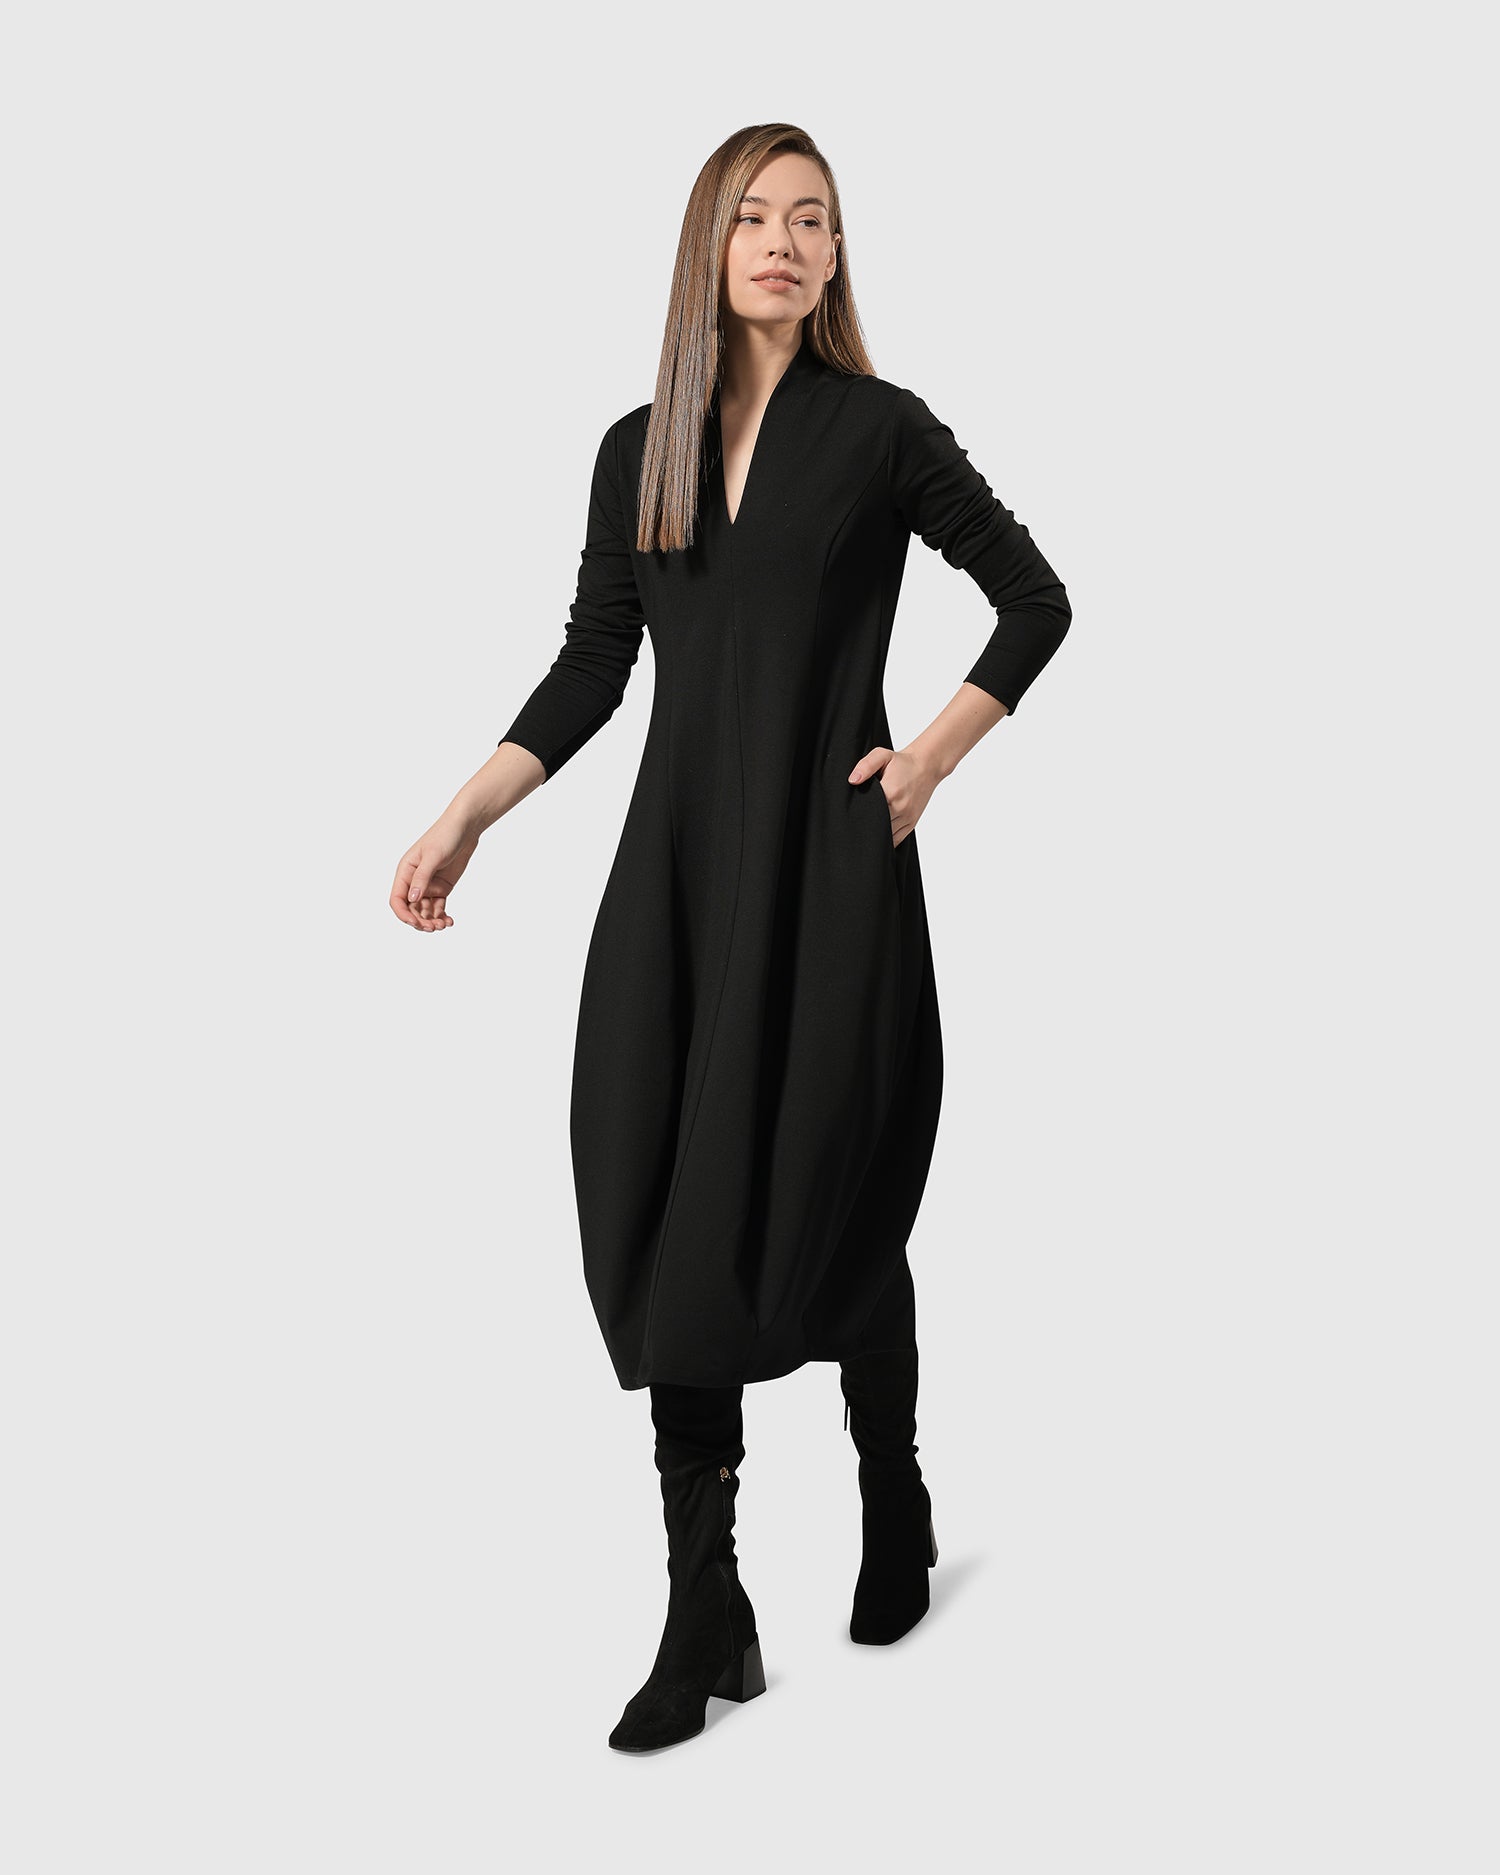 The Cocoon Dress